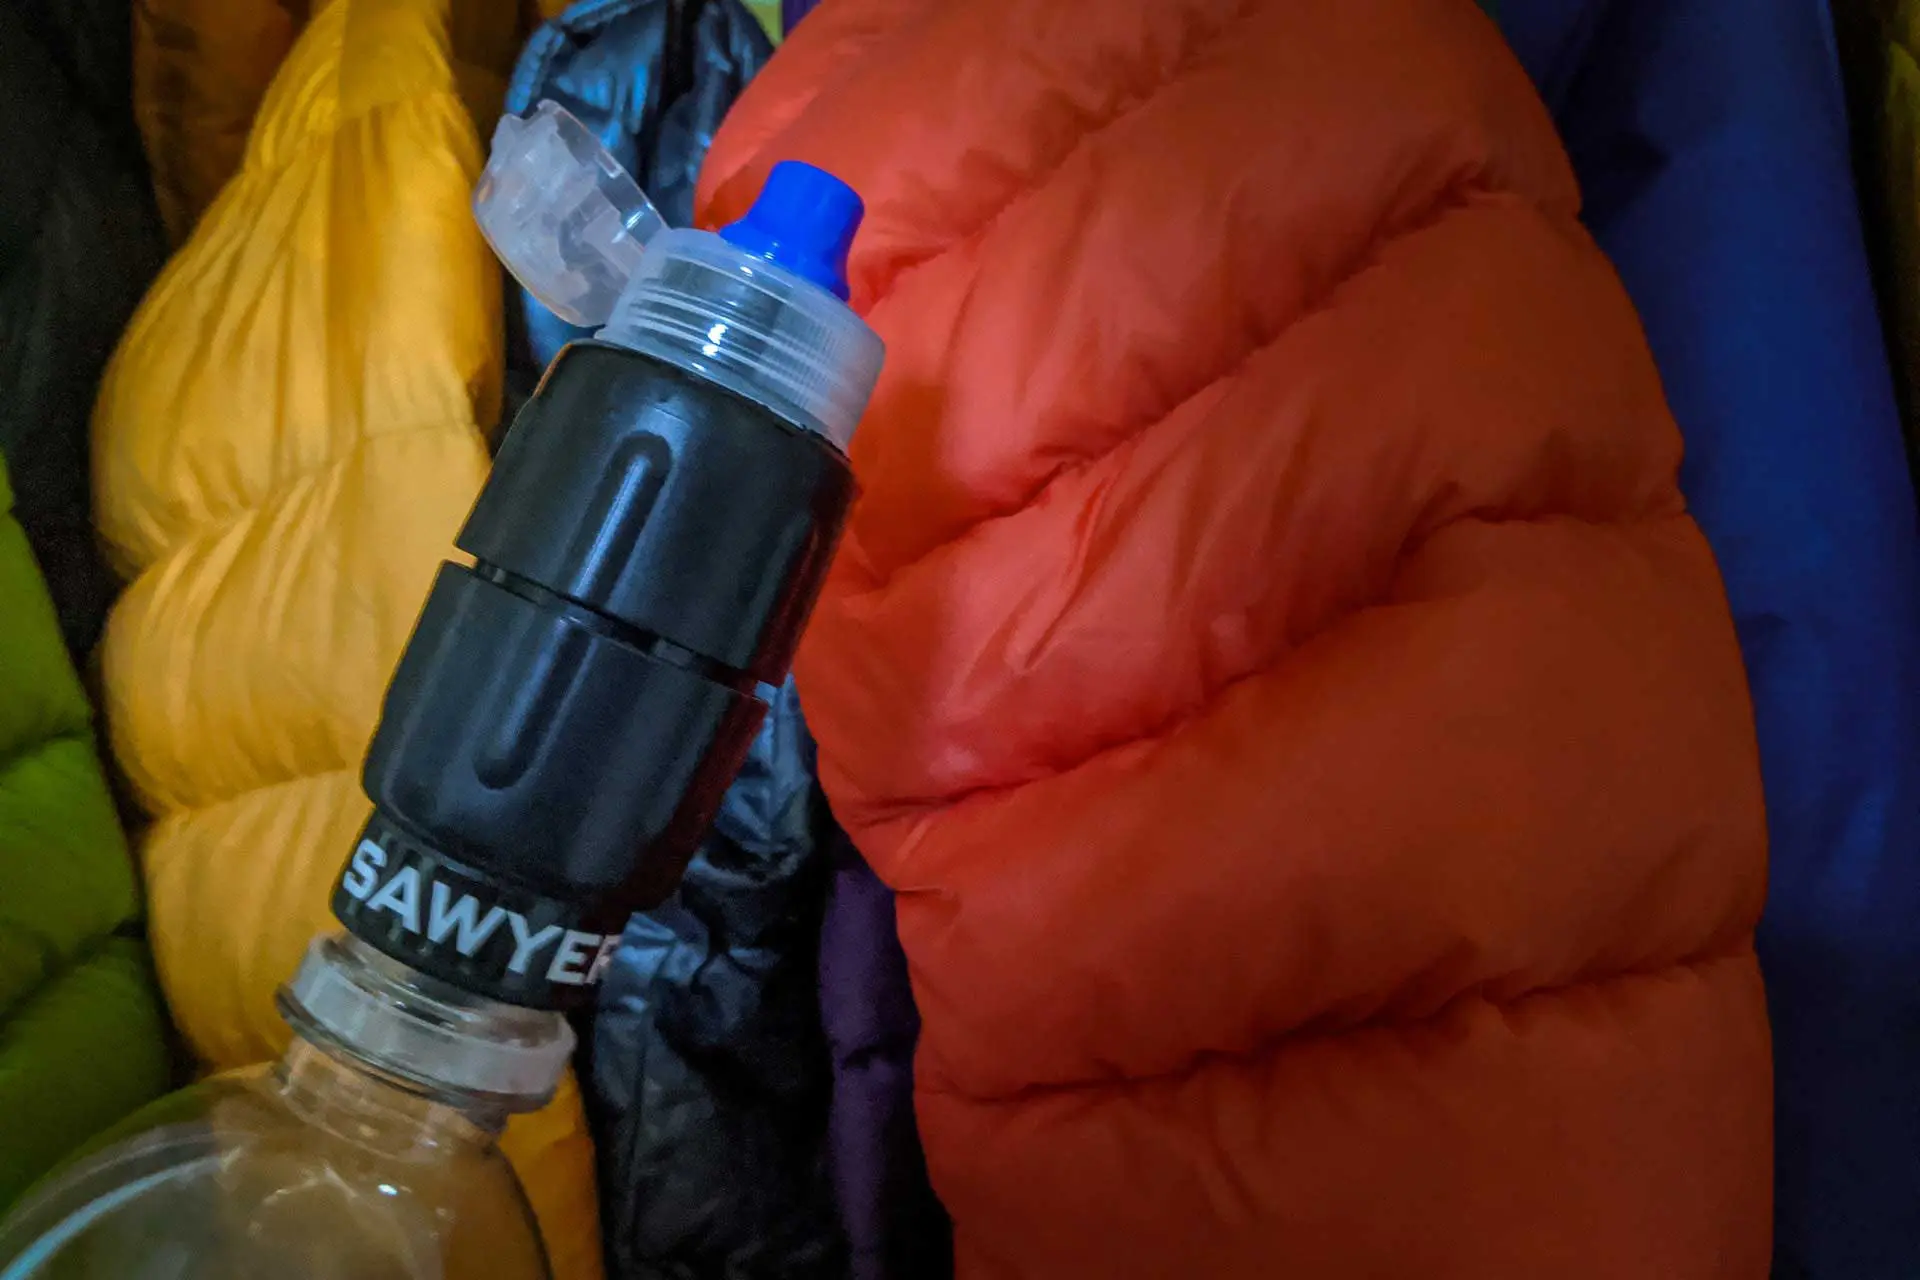 Sawyer Micro Squeeze Review